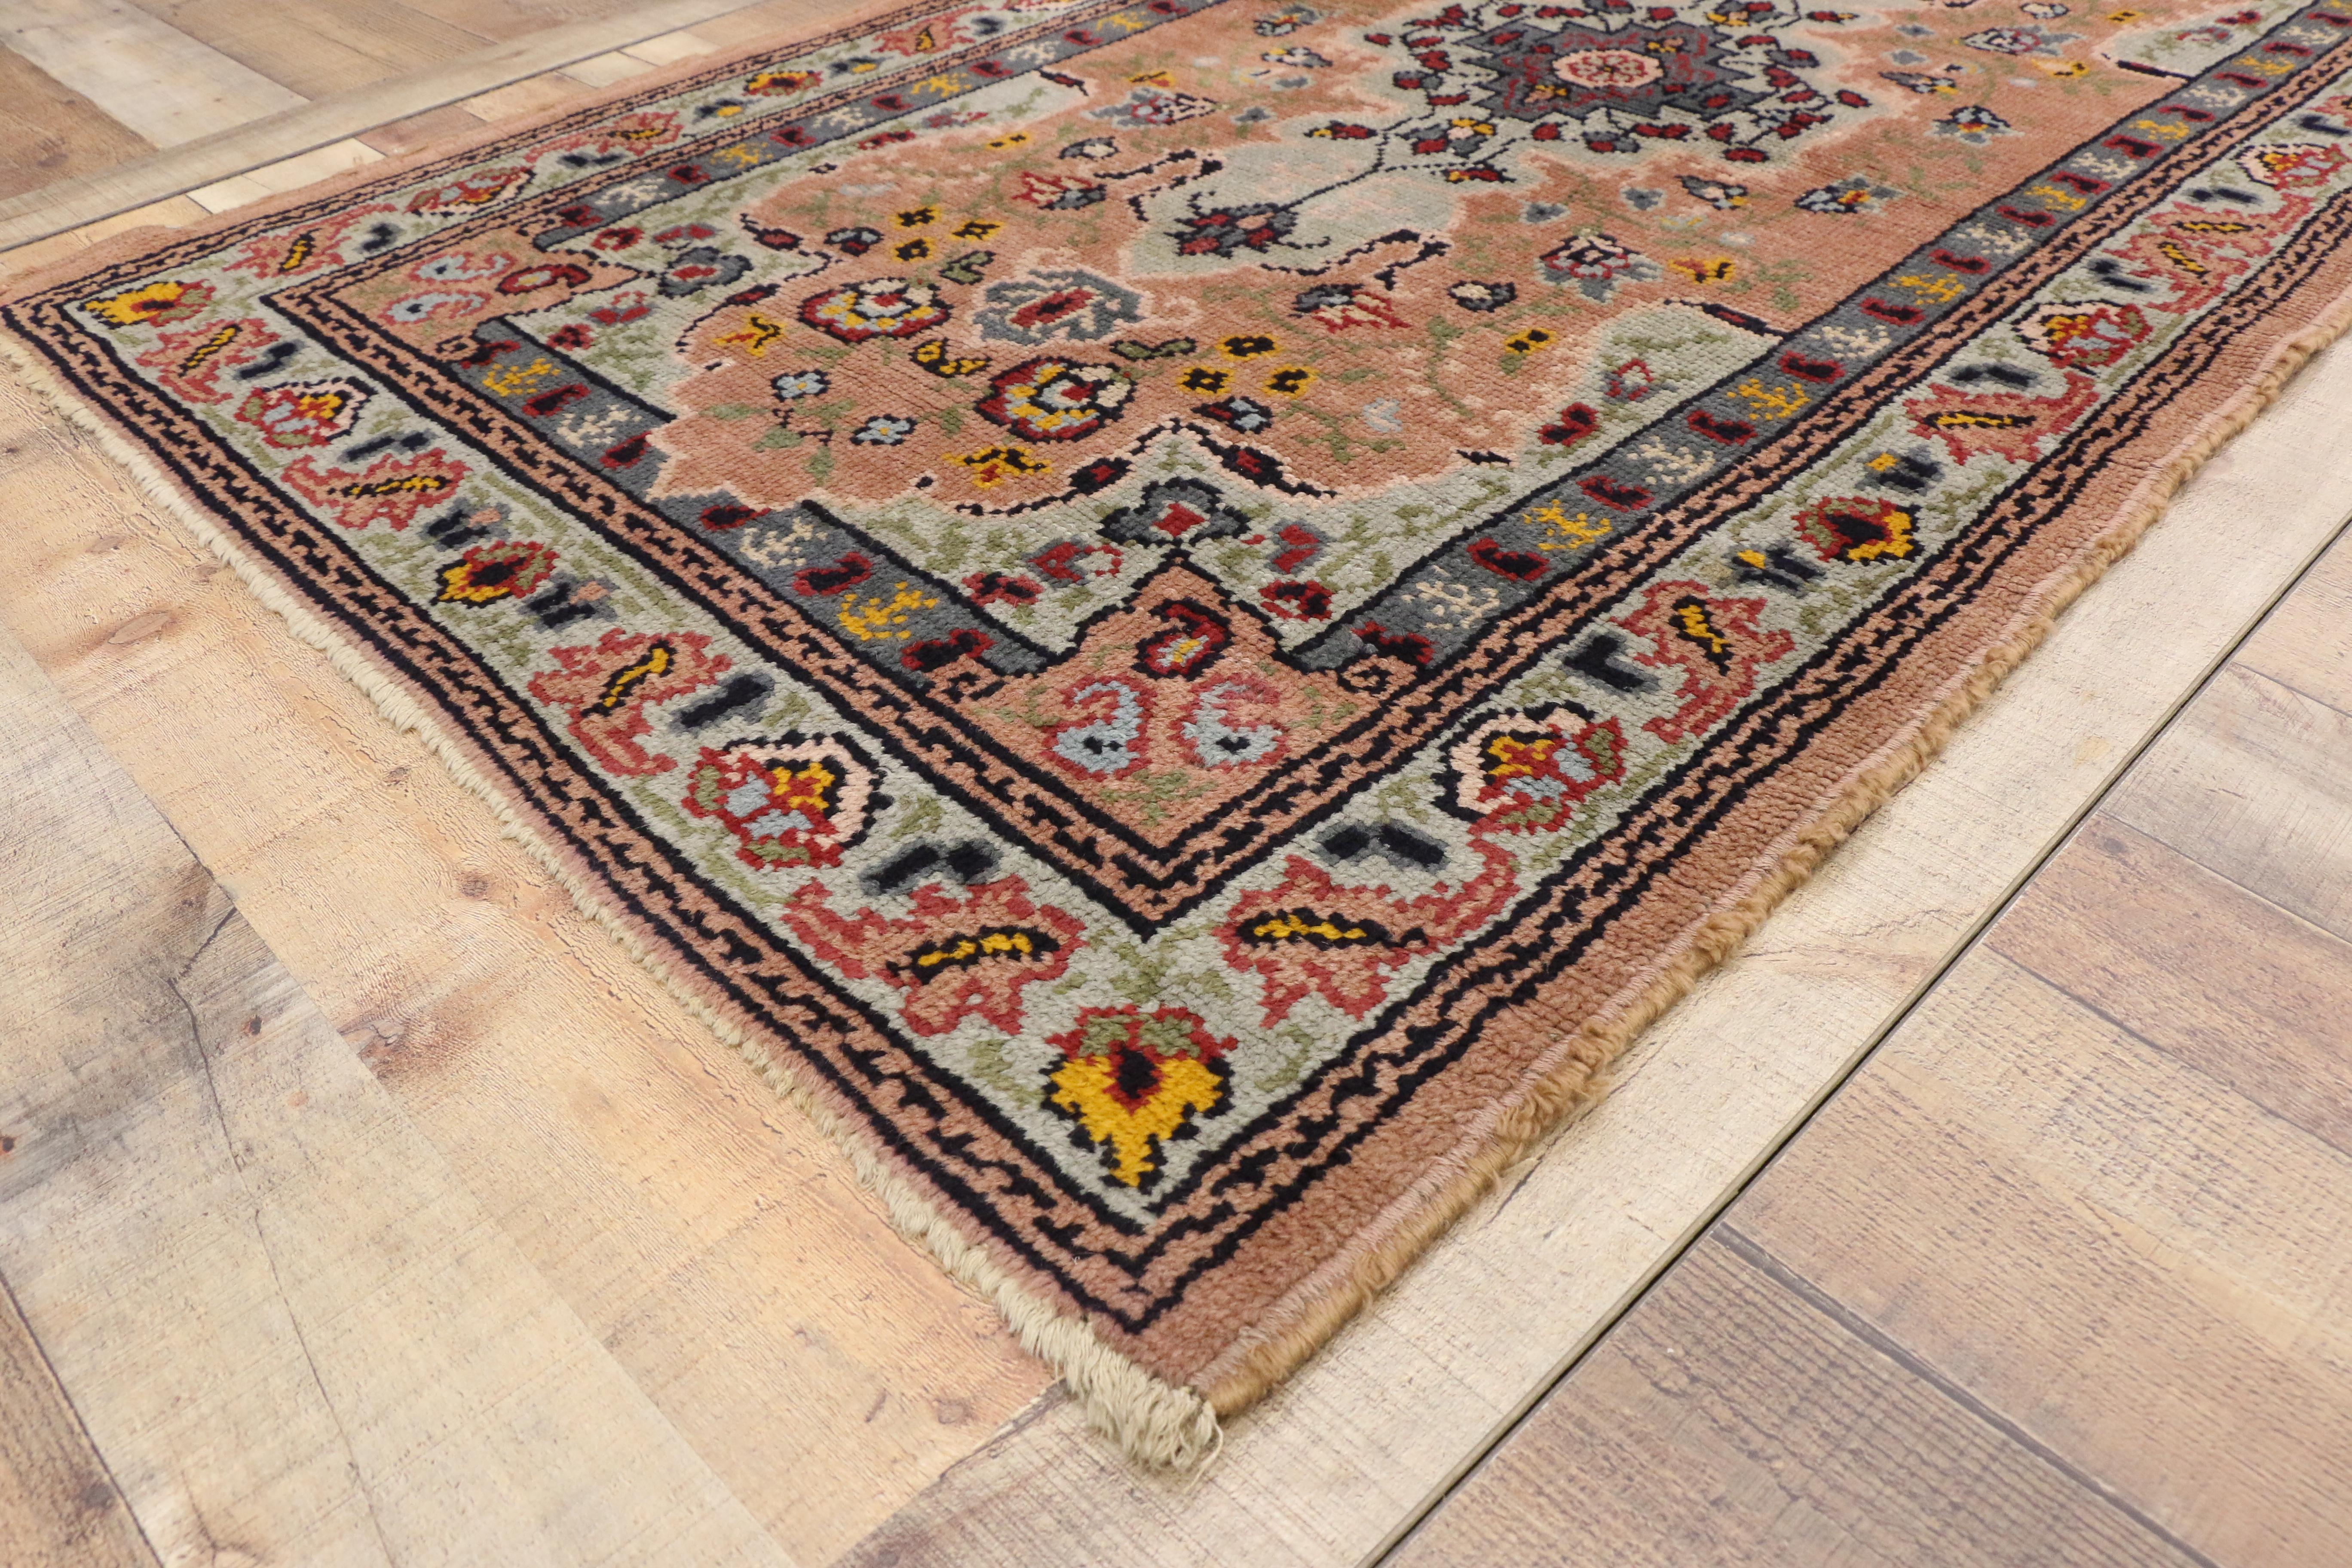 76876, vintage Portuguese Accent rug with traditional style. This delightful vintage Portuguese rug features a muted pale sky blue medallion with red florals on a salmon field. Intricate floral spandrels and a pale sky blue floral border frame the